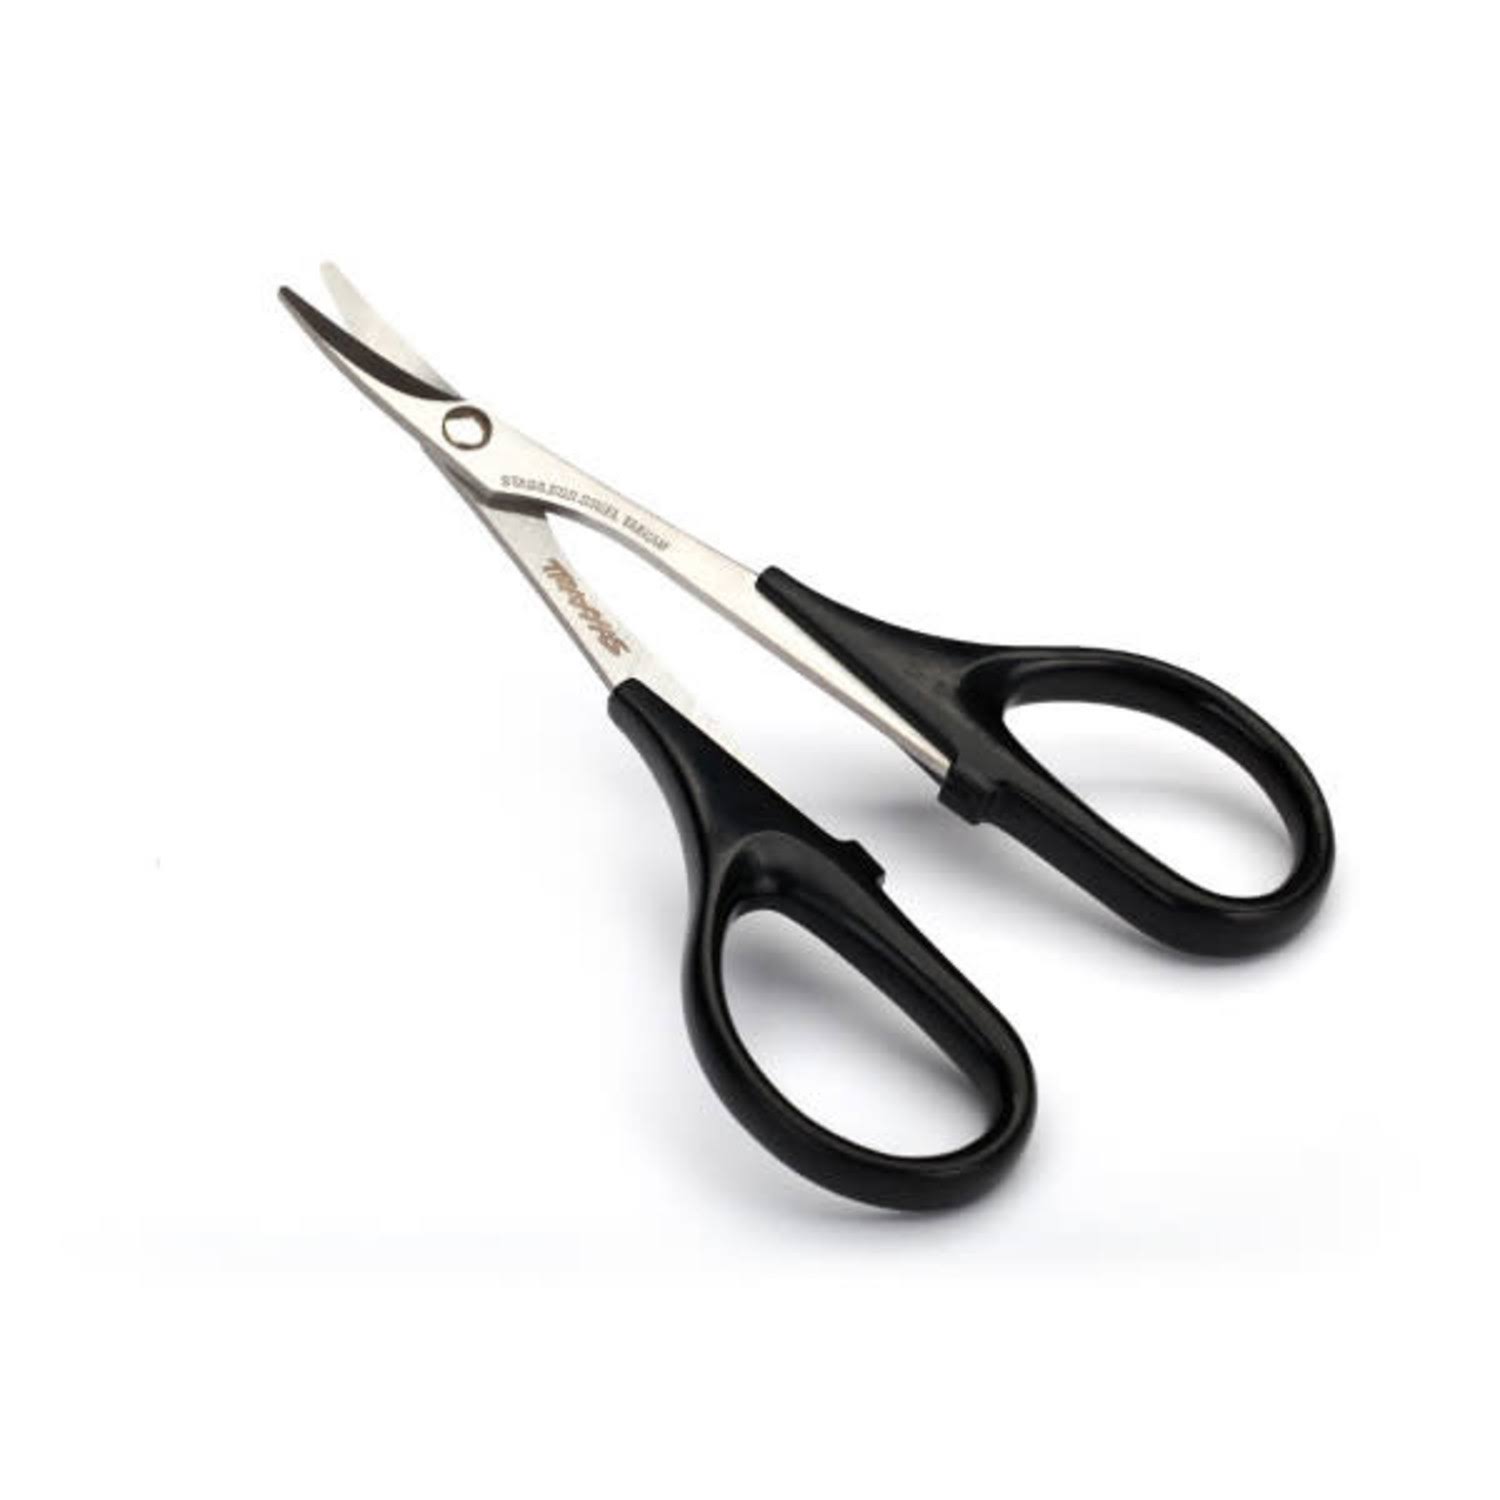 Traxxas Curved Tip Scissors